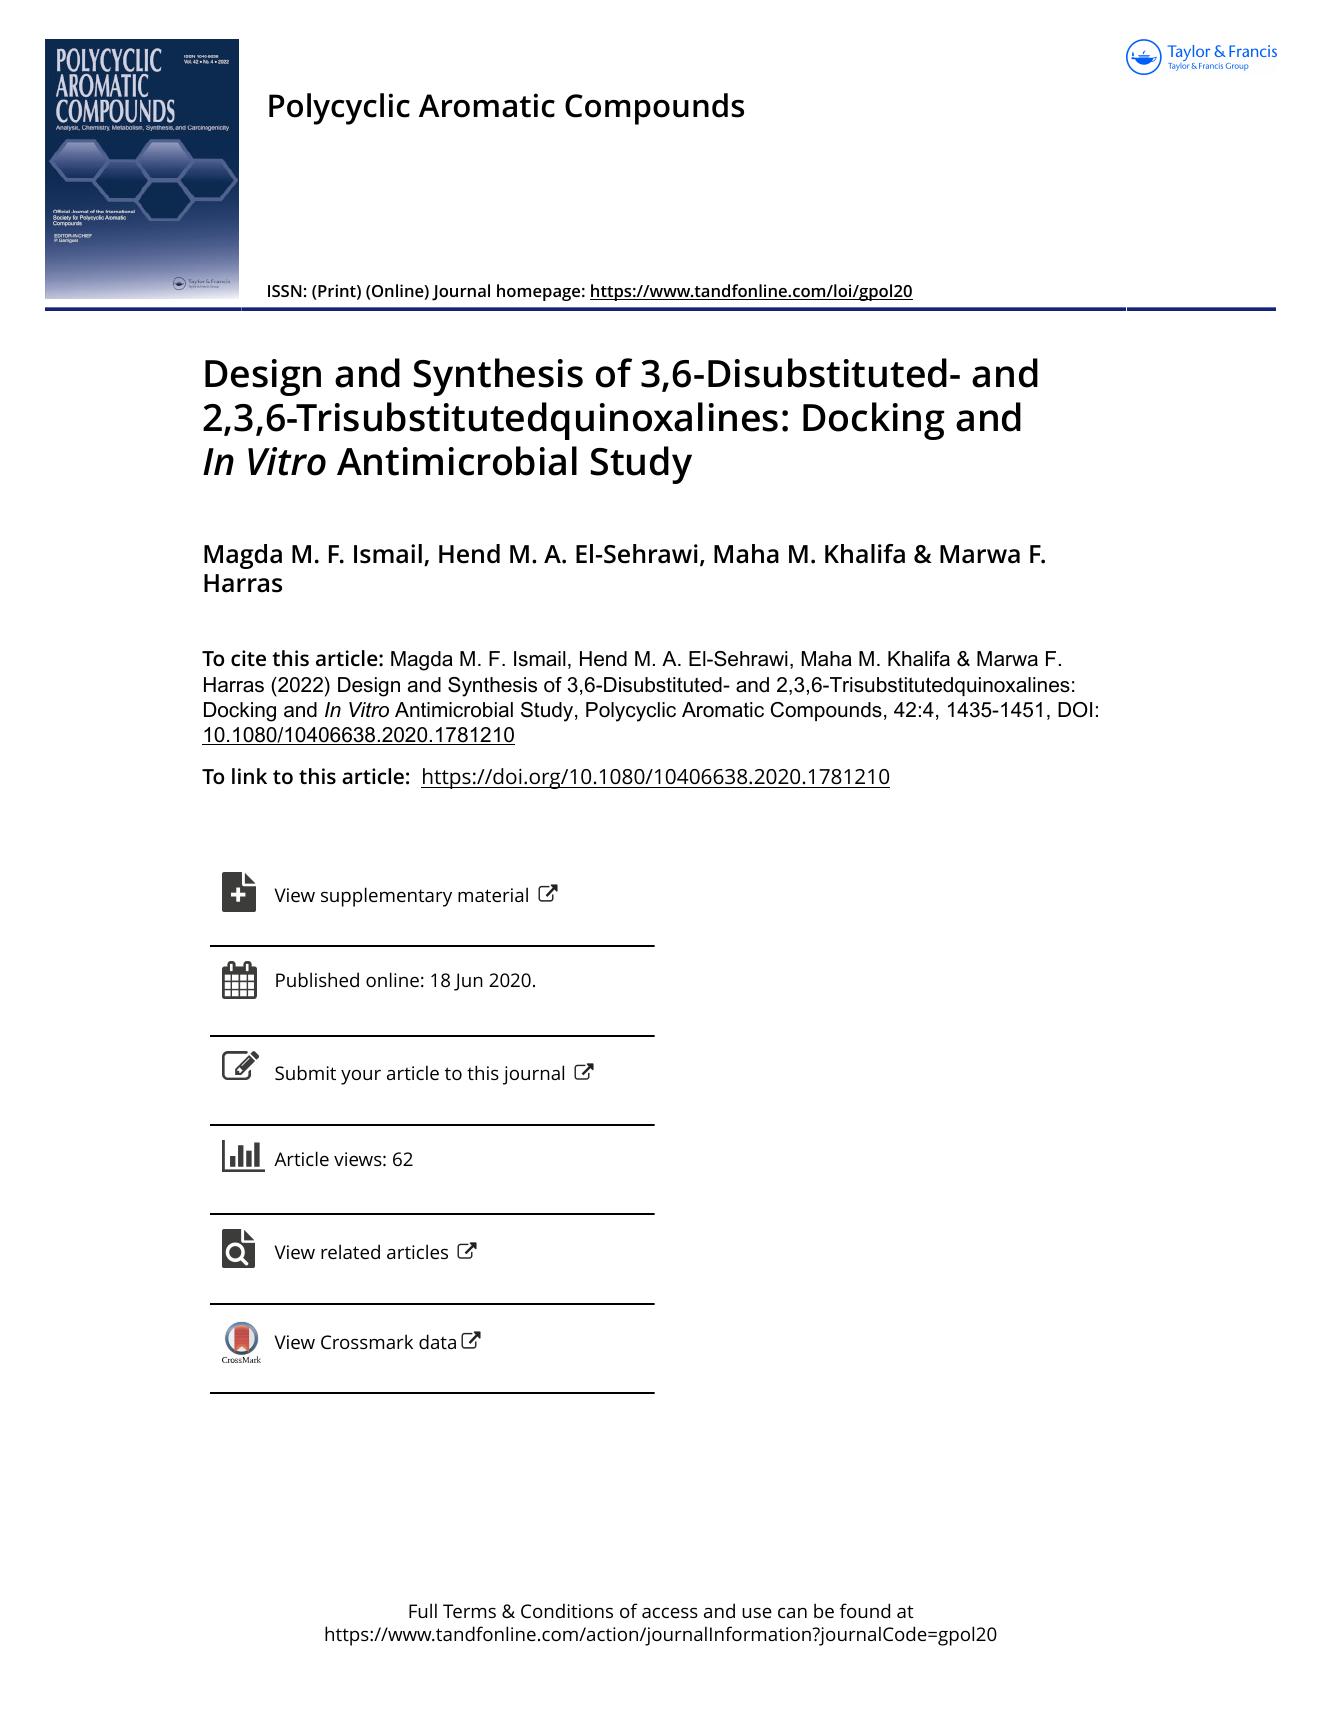 Design and Synthesis of 3,6-Disubstituted- and 2,3,6-Trisubstitutedquinoxalines: Docking and InÂ Vitro Antimicrobial Study by Ismail Magda M. F. & El-Sehrawi Hend M. A. & Khalifa Maha M. & Harras Marwa F